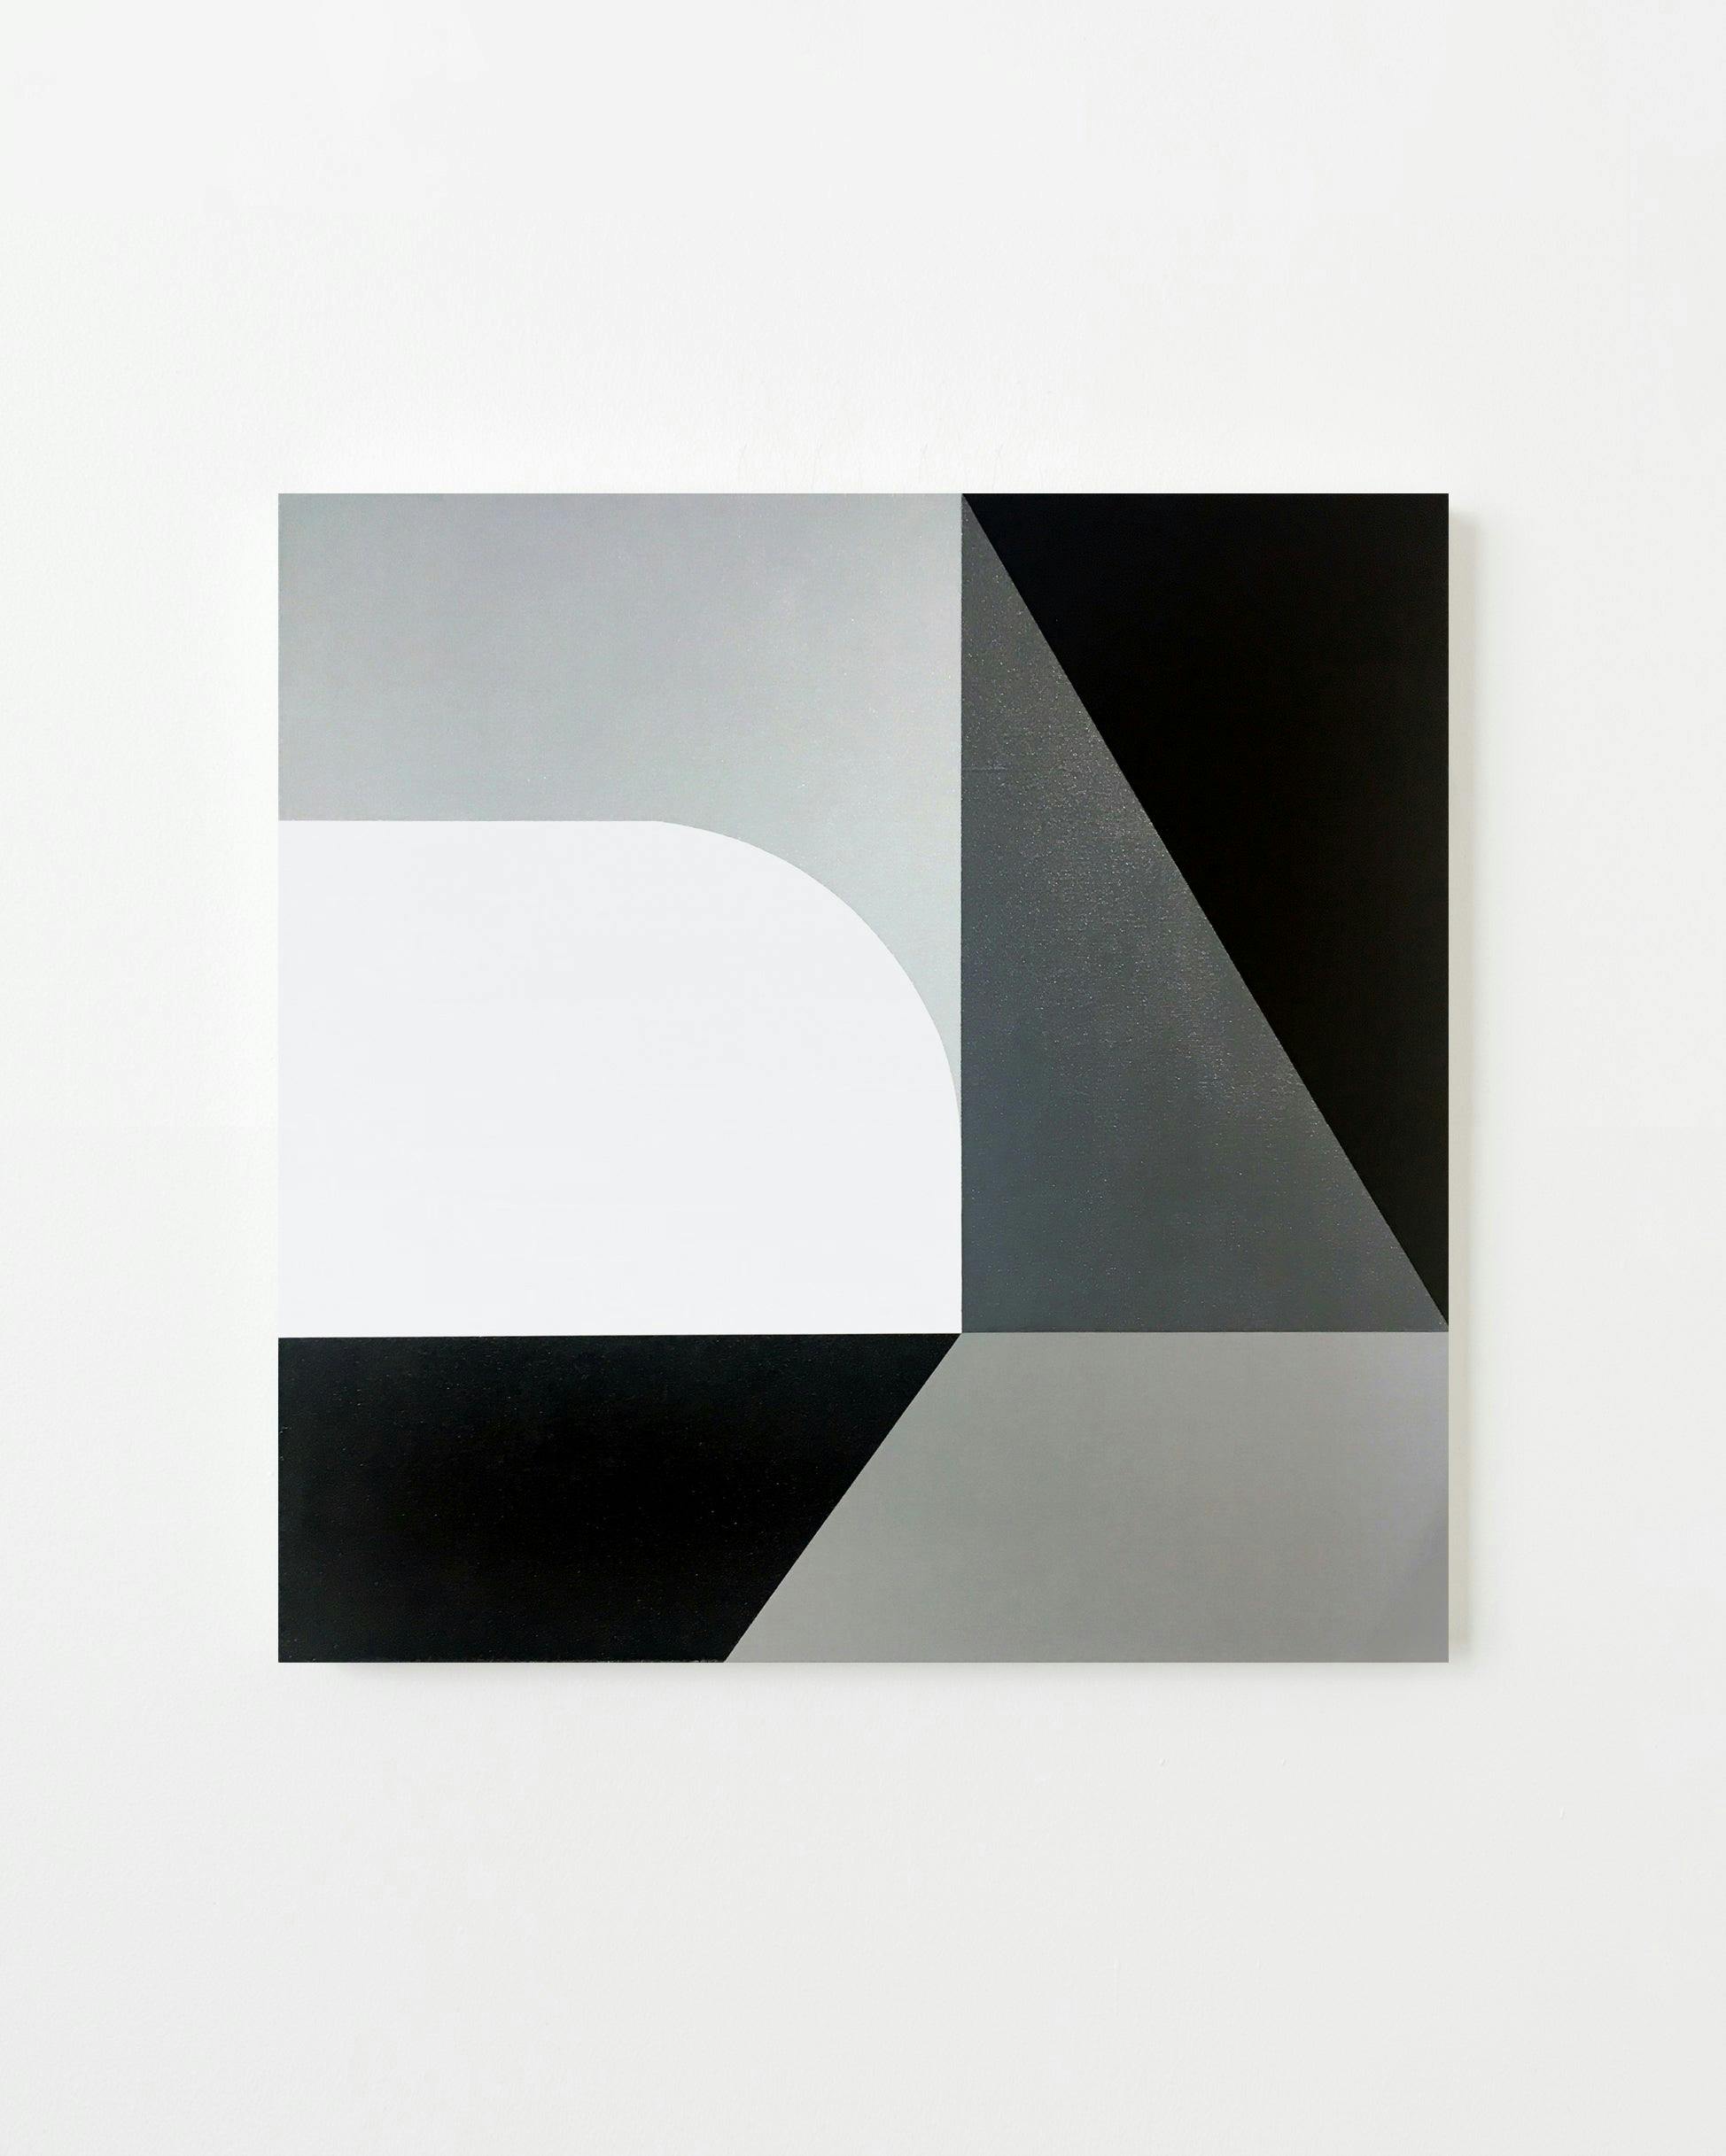 Painting by Chad Kouri titled "A Sliding Scale from Black to White (Five Values) #1".